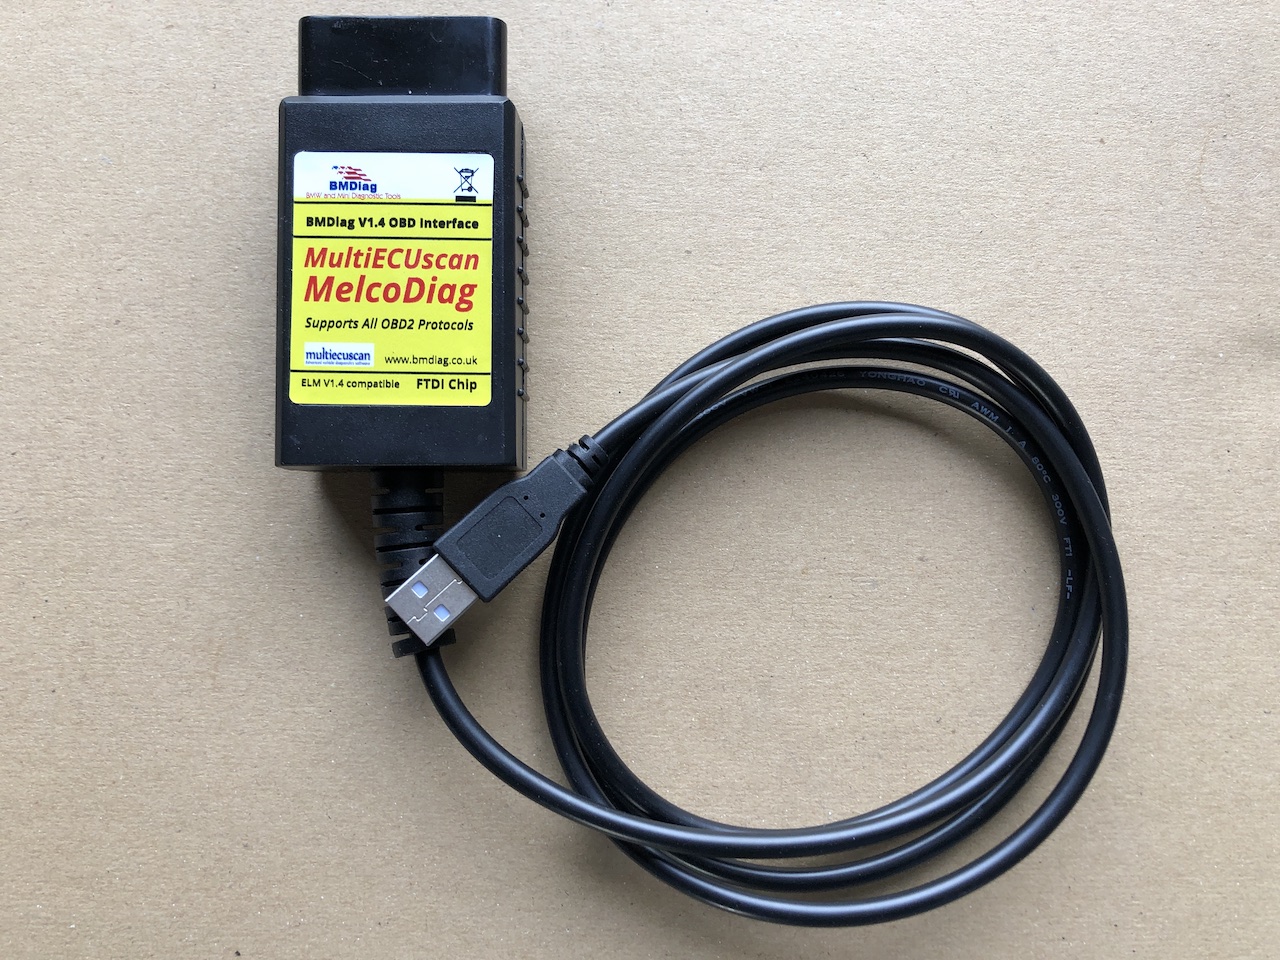 BMDiag OBD Interface for Melcodiag, and MultiECUScan Software